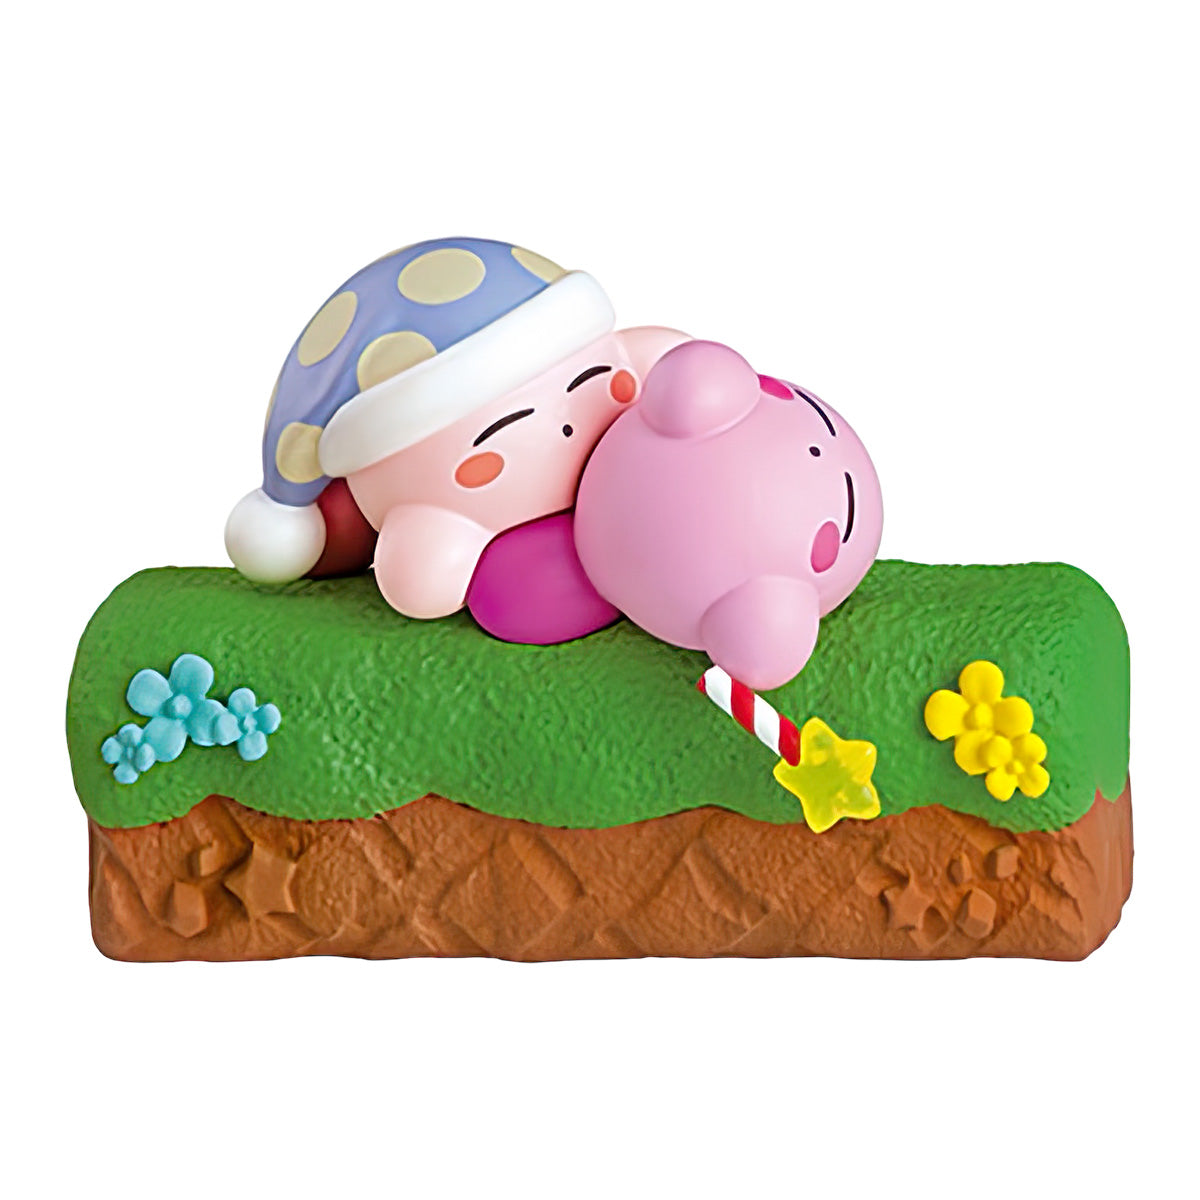 SLEEP - Kirby 30th Anniversary Poyotto Collection RE-MENT Figure #5 USA SHIP!